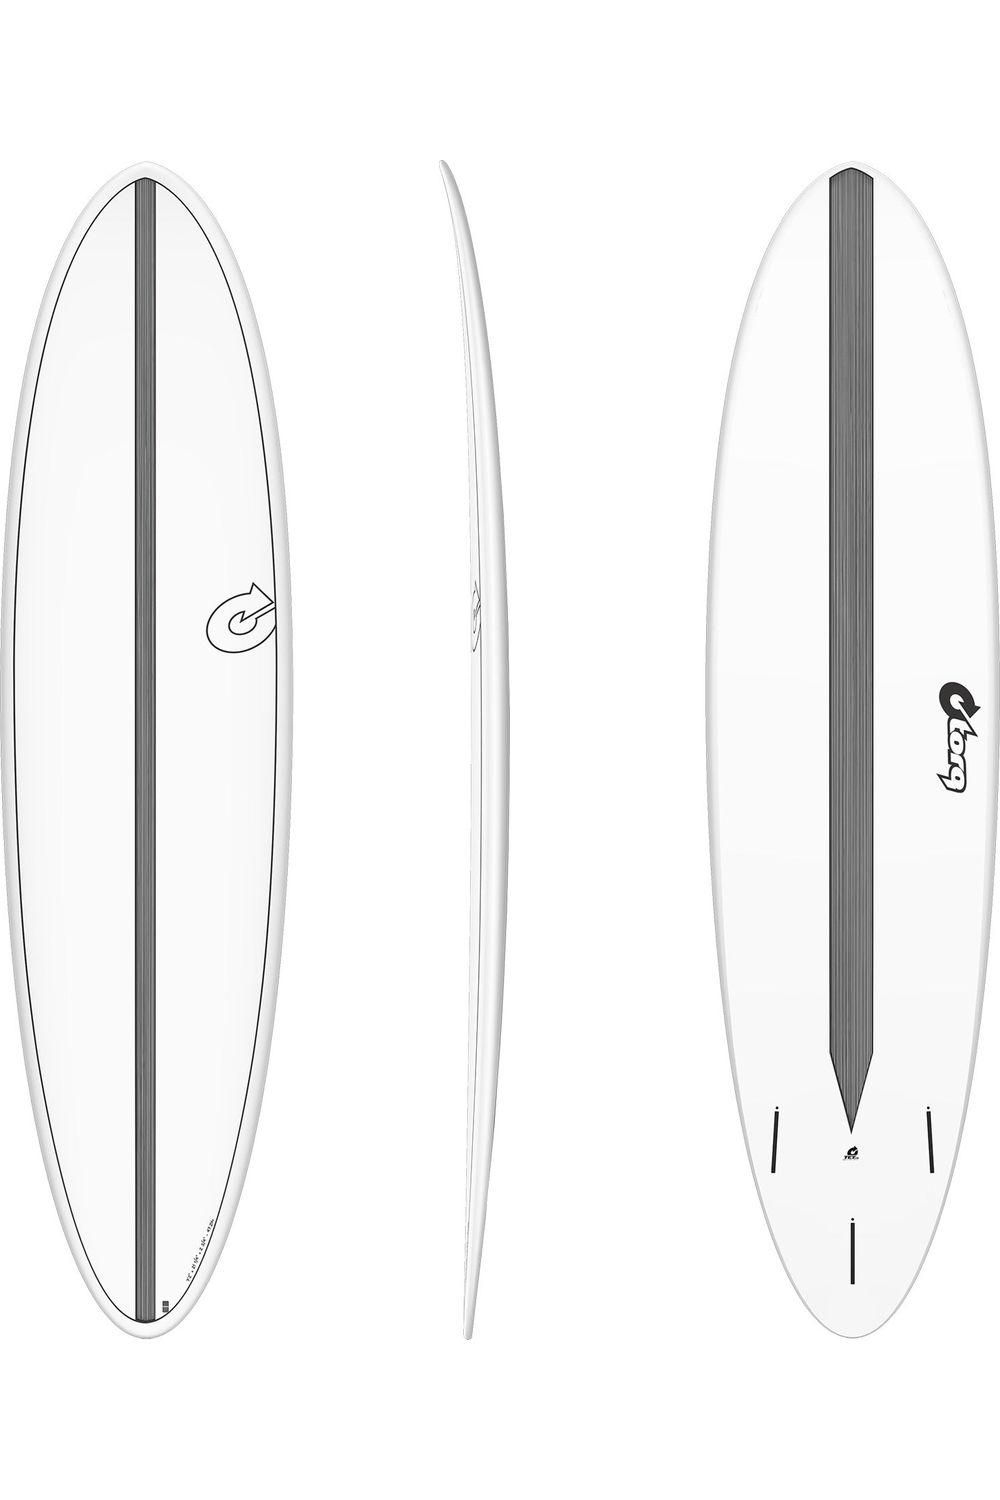 Torq TET Mod Fun Surfboard with Carbon Strip in White